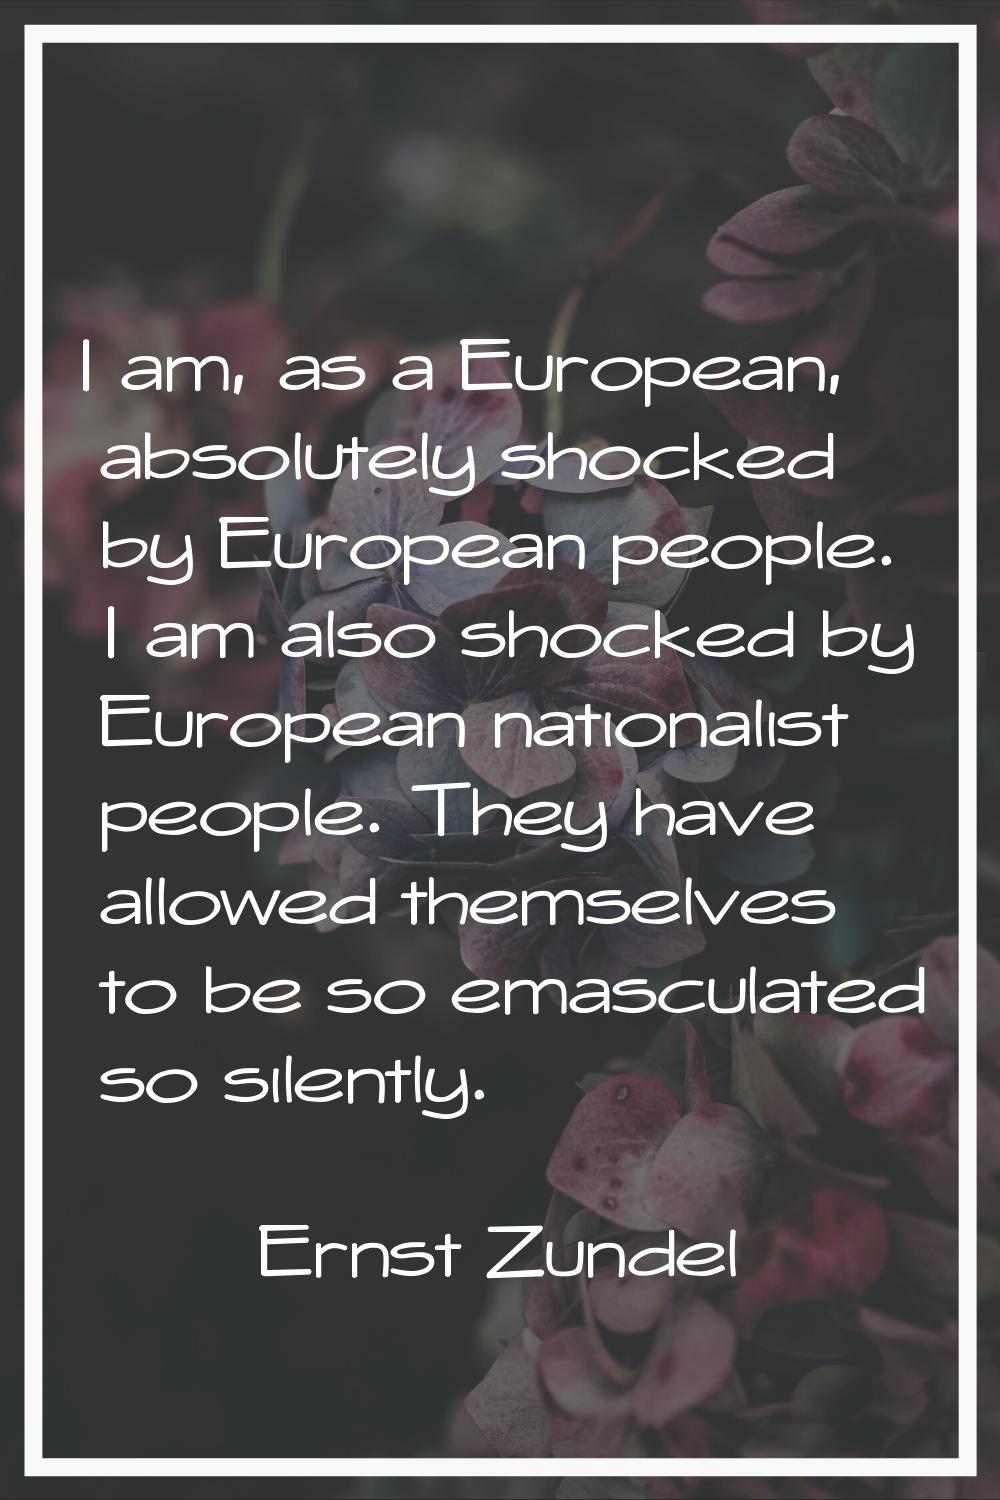 I am, as a European, absolutely shocked by European people. I am also shocked by European nationali